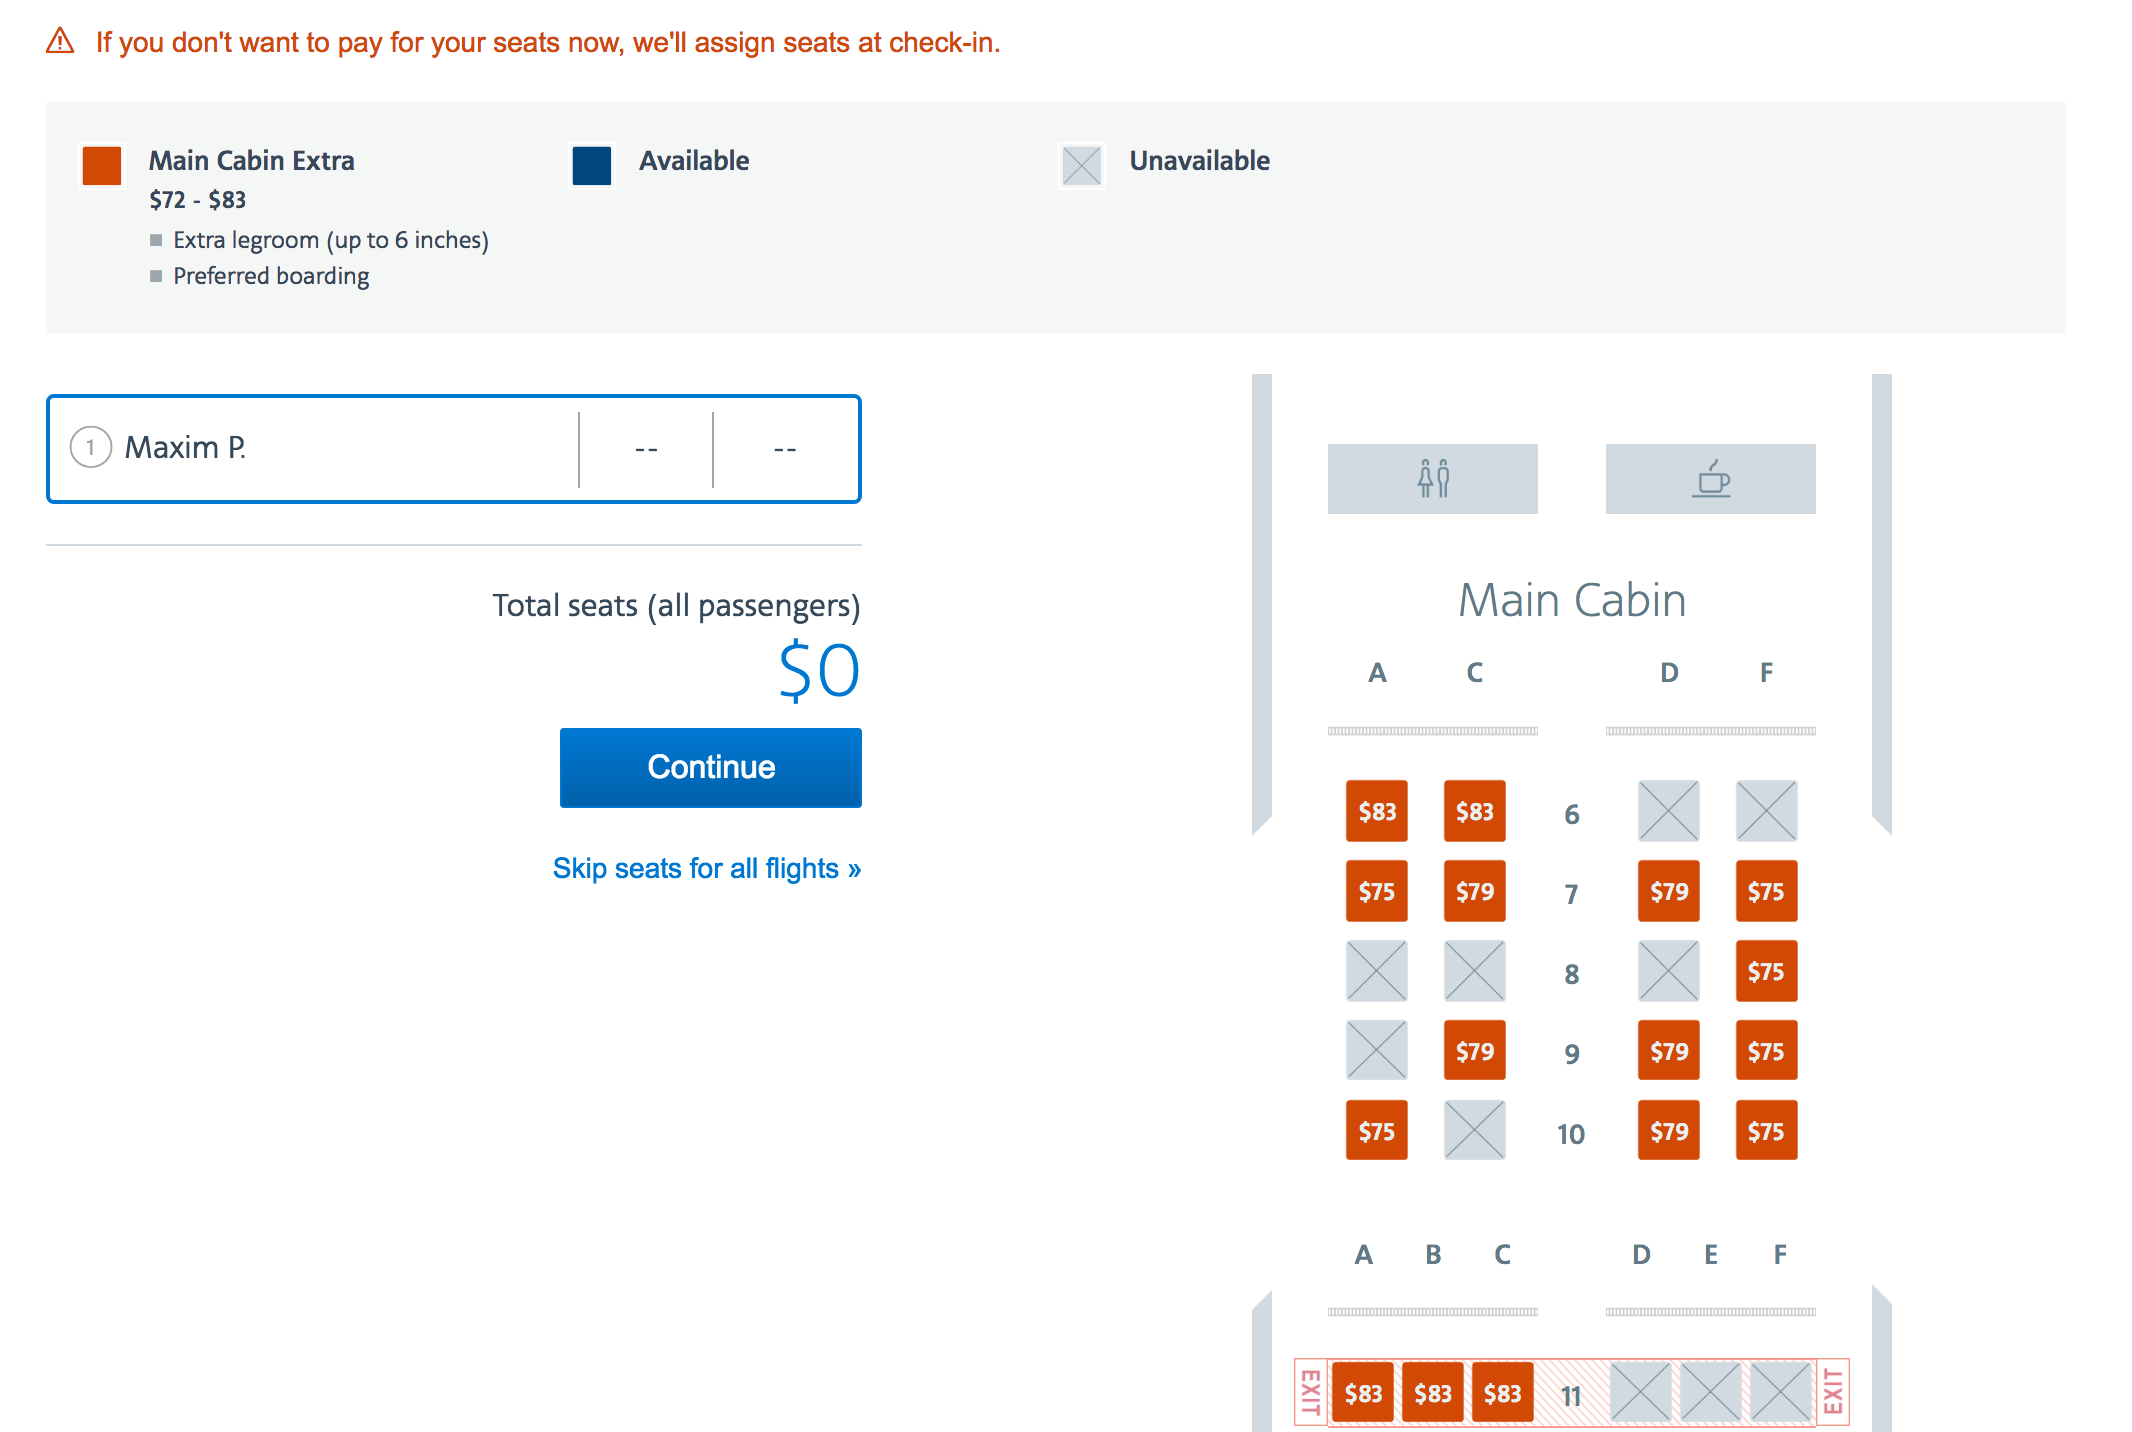 Business Class is Being Sold as Main Cabin Extra